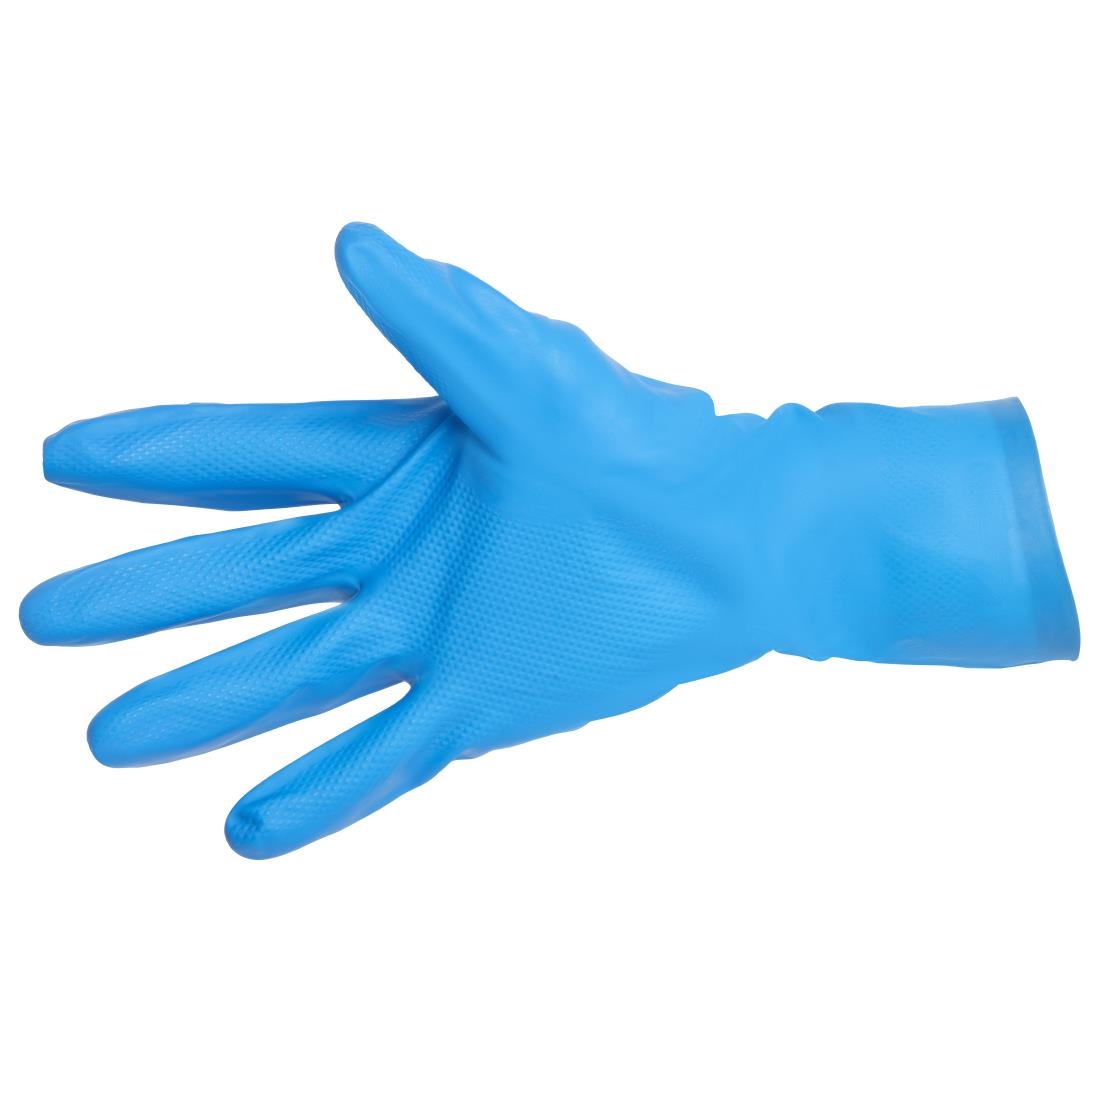 MAPA Ultranitril 475 Liquid-Proof Food Handling and Janitorial Gloves Blue Large